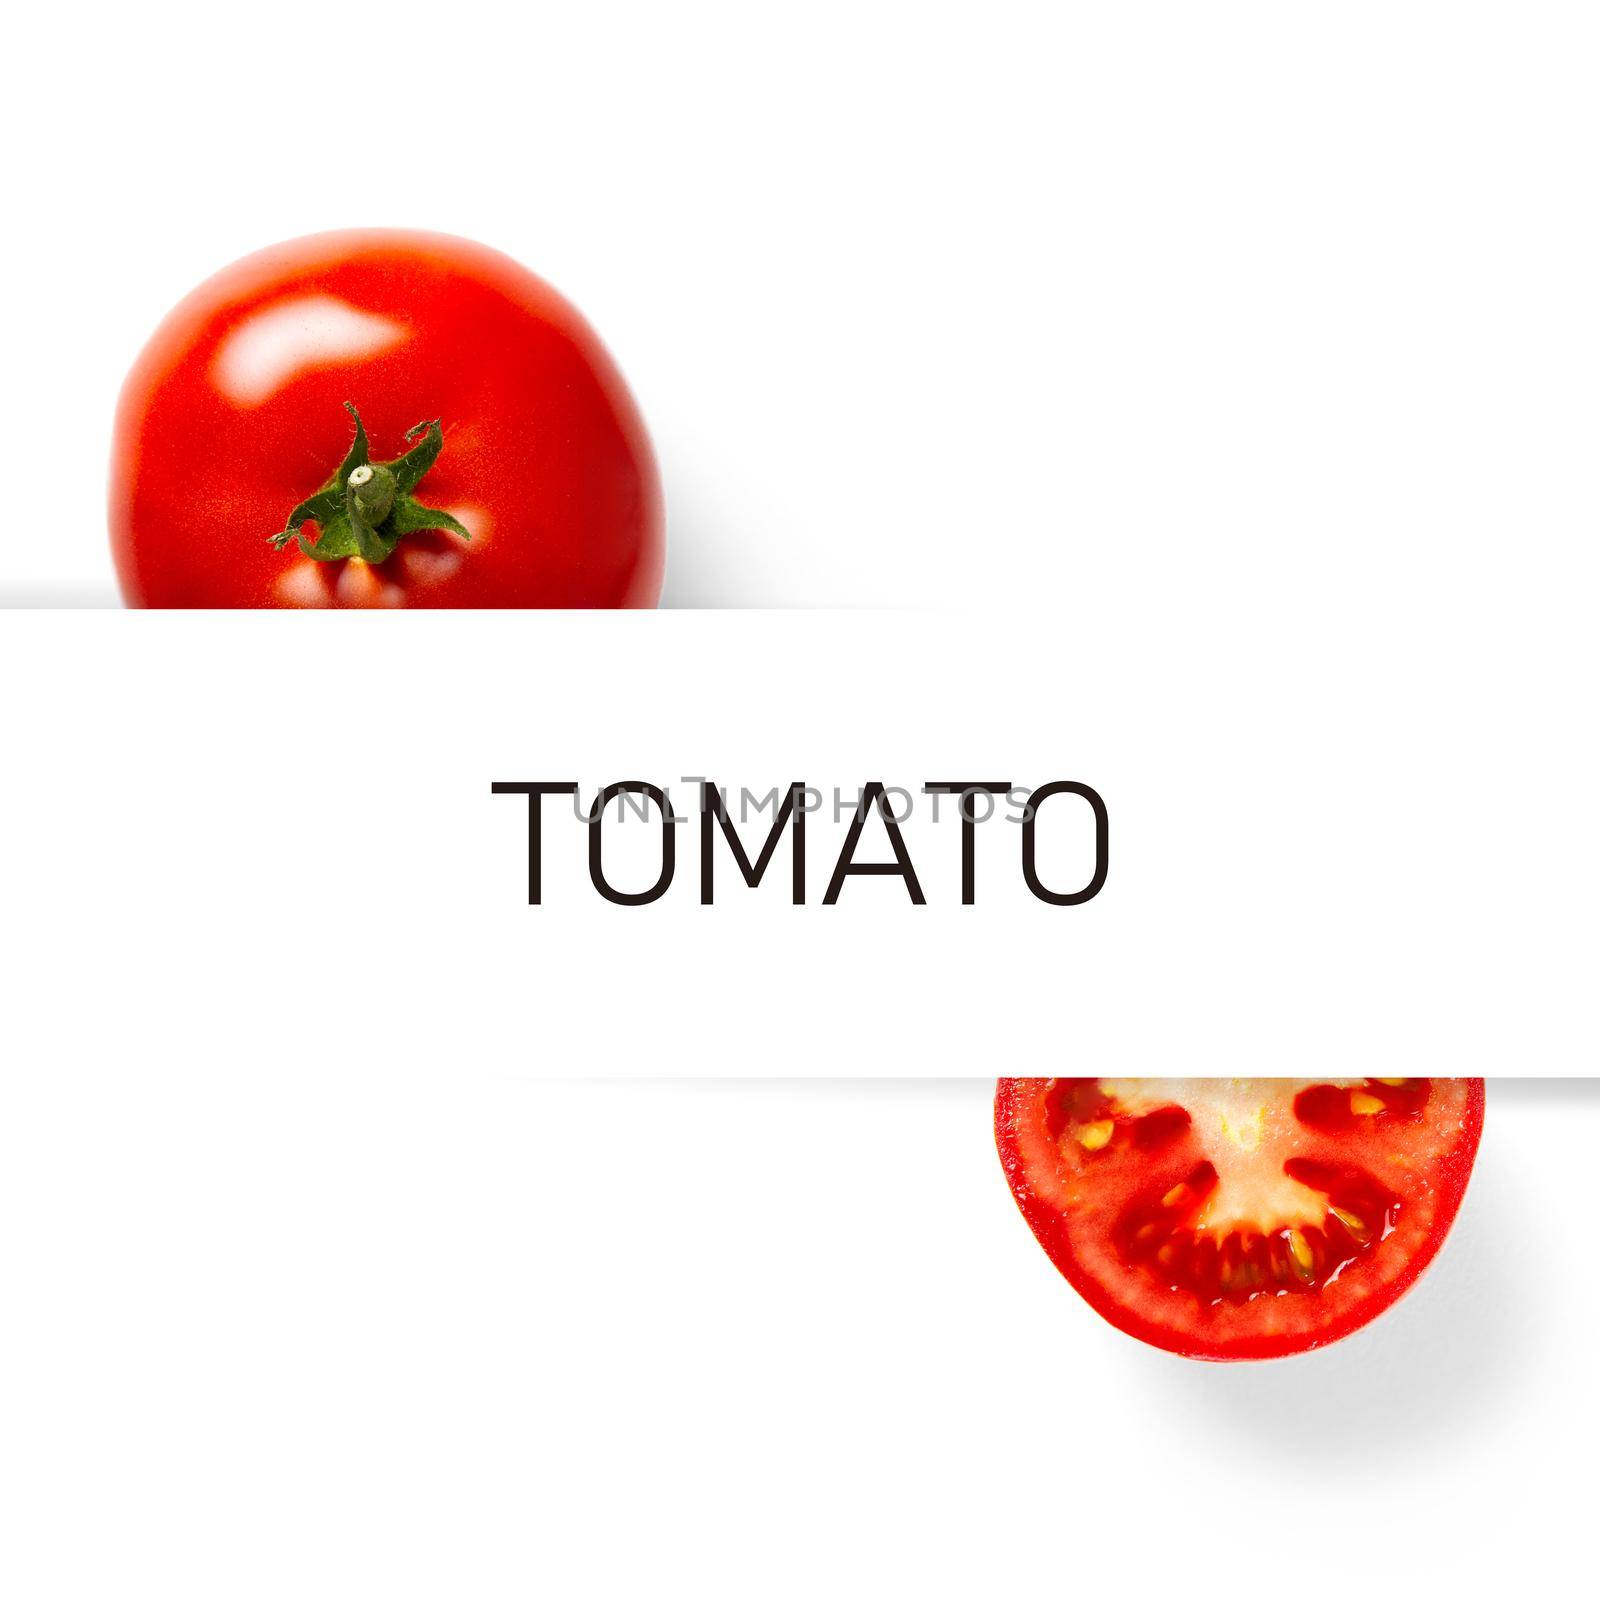 Tomato creative layout and composition isolated on white background Healthy eating, dieting concept by PhotoTime